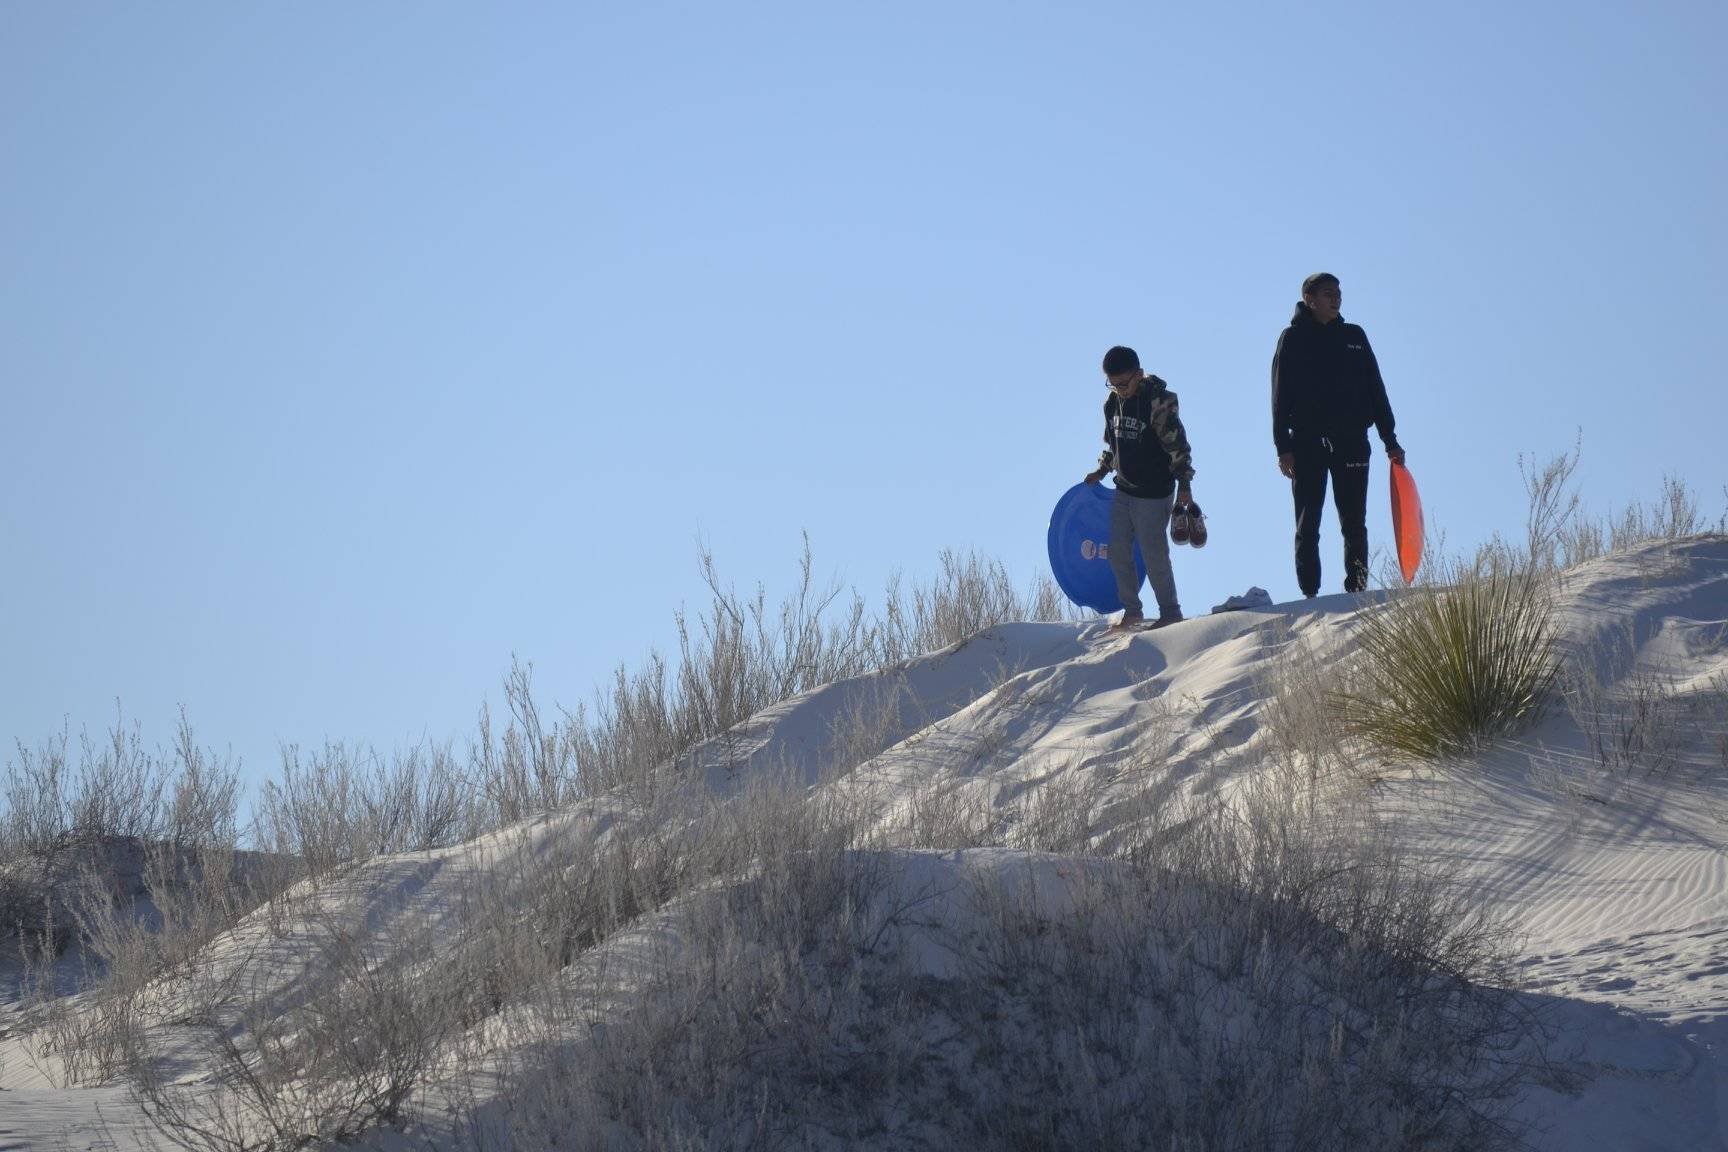 Sledders at White Sands National Monument in New Mexico. (Photo by Victoria Petersen/Peninsula Clarion)